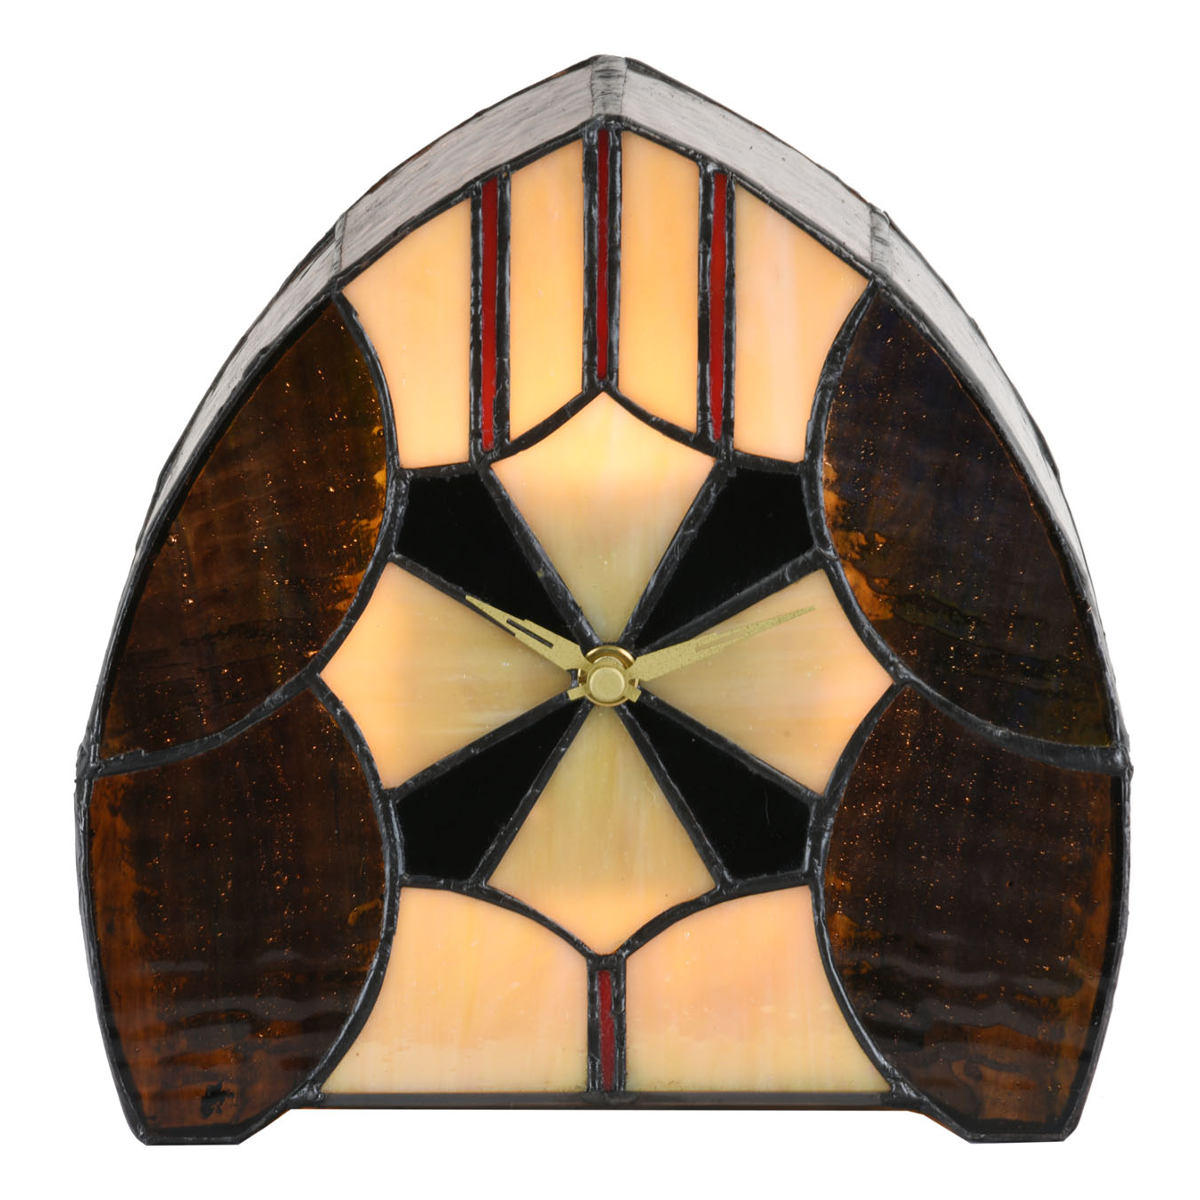 Small Tiffany glass table light with built-in clock